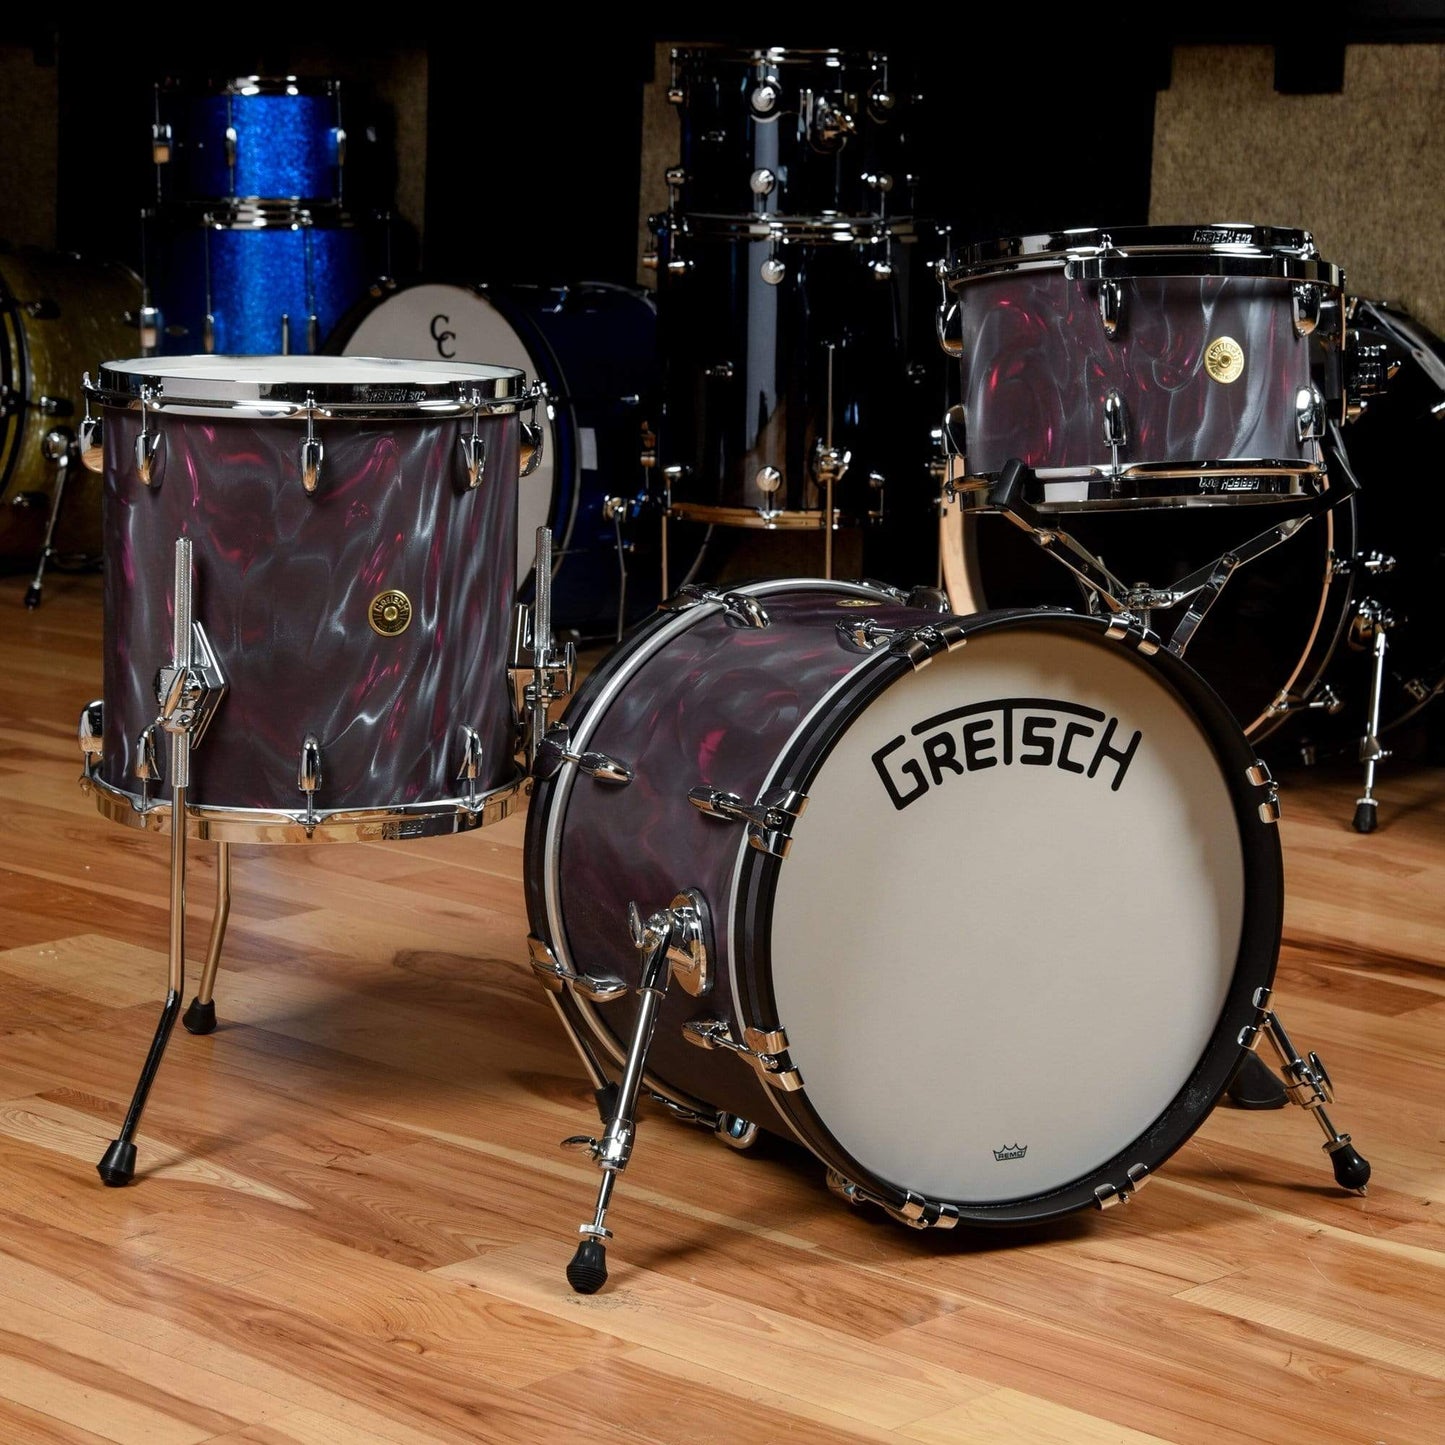 Gretsch Broadkaster 12/14/18 3pc. Drum Kit Black Satin Flame Drums and Percussion / Acoustic Drums / Full Acoustic Kits